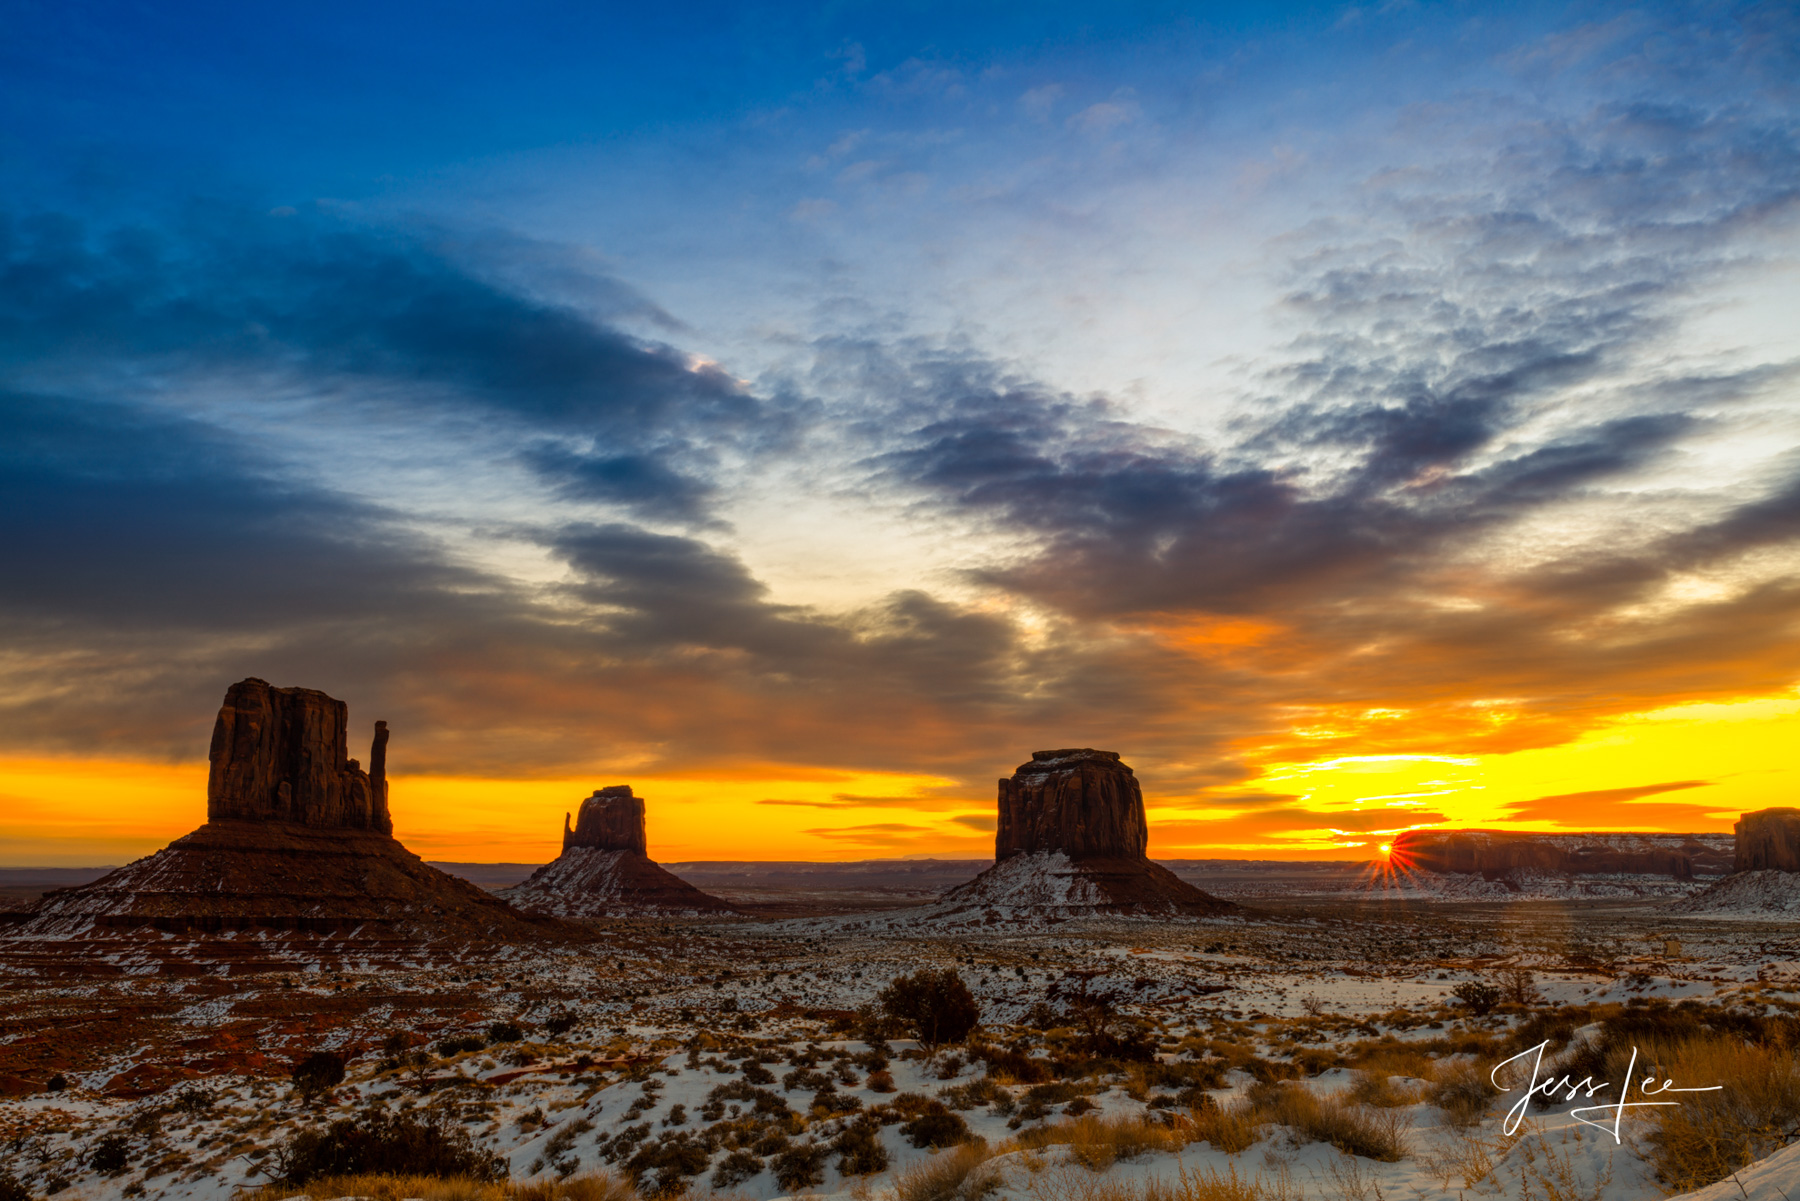 Limited Edition of 50 Exclusive high-resolution Museum Quality Fine Art Prints of Red Rocks Country sunrise of Monument Valley...